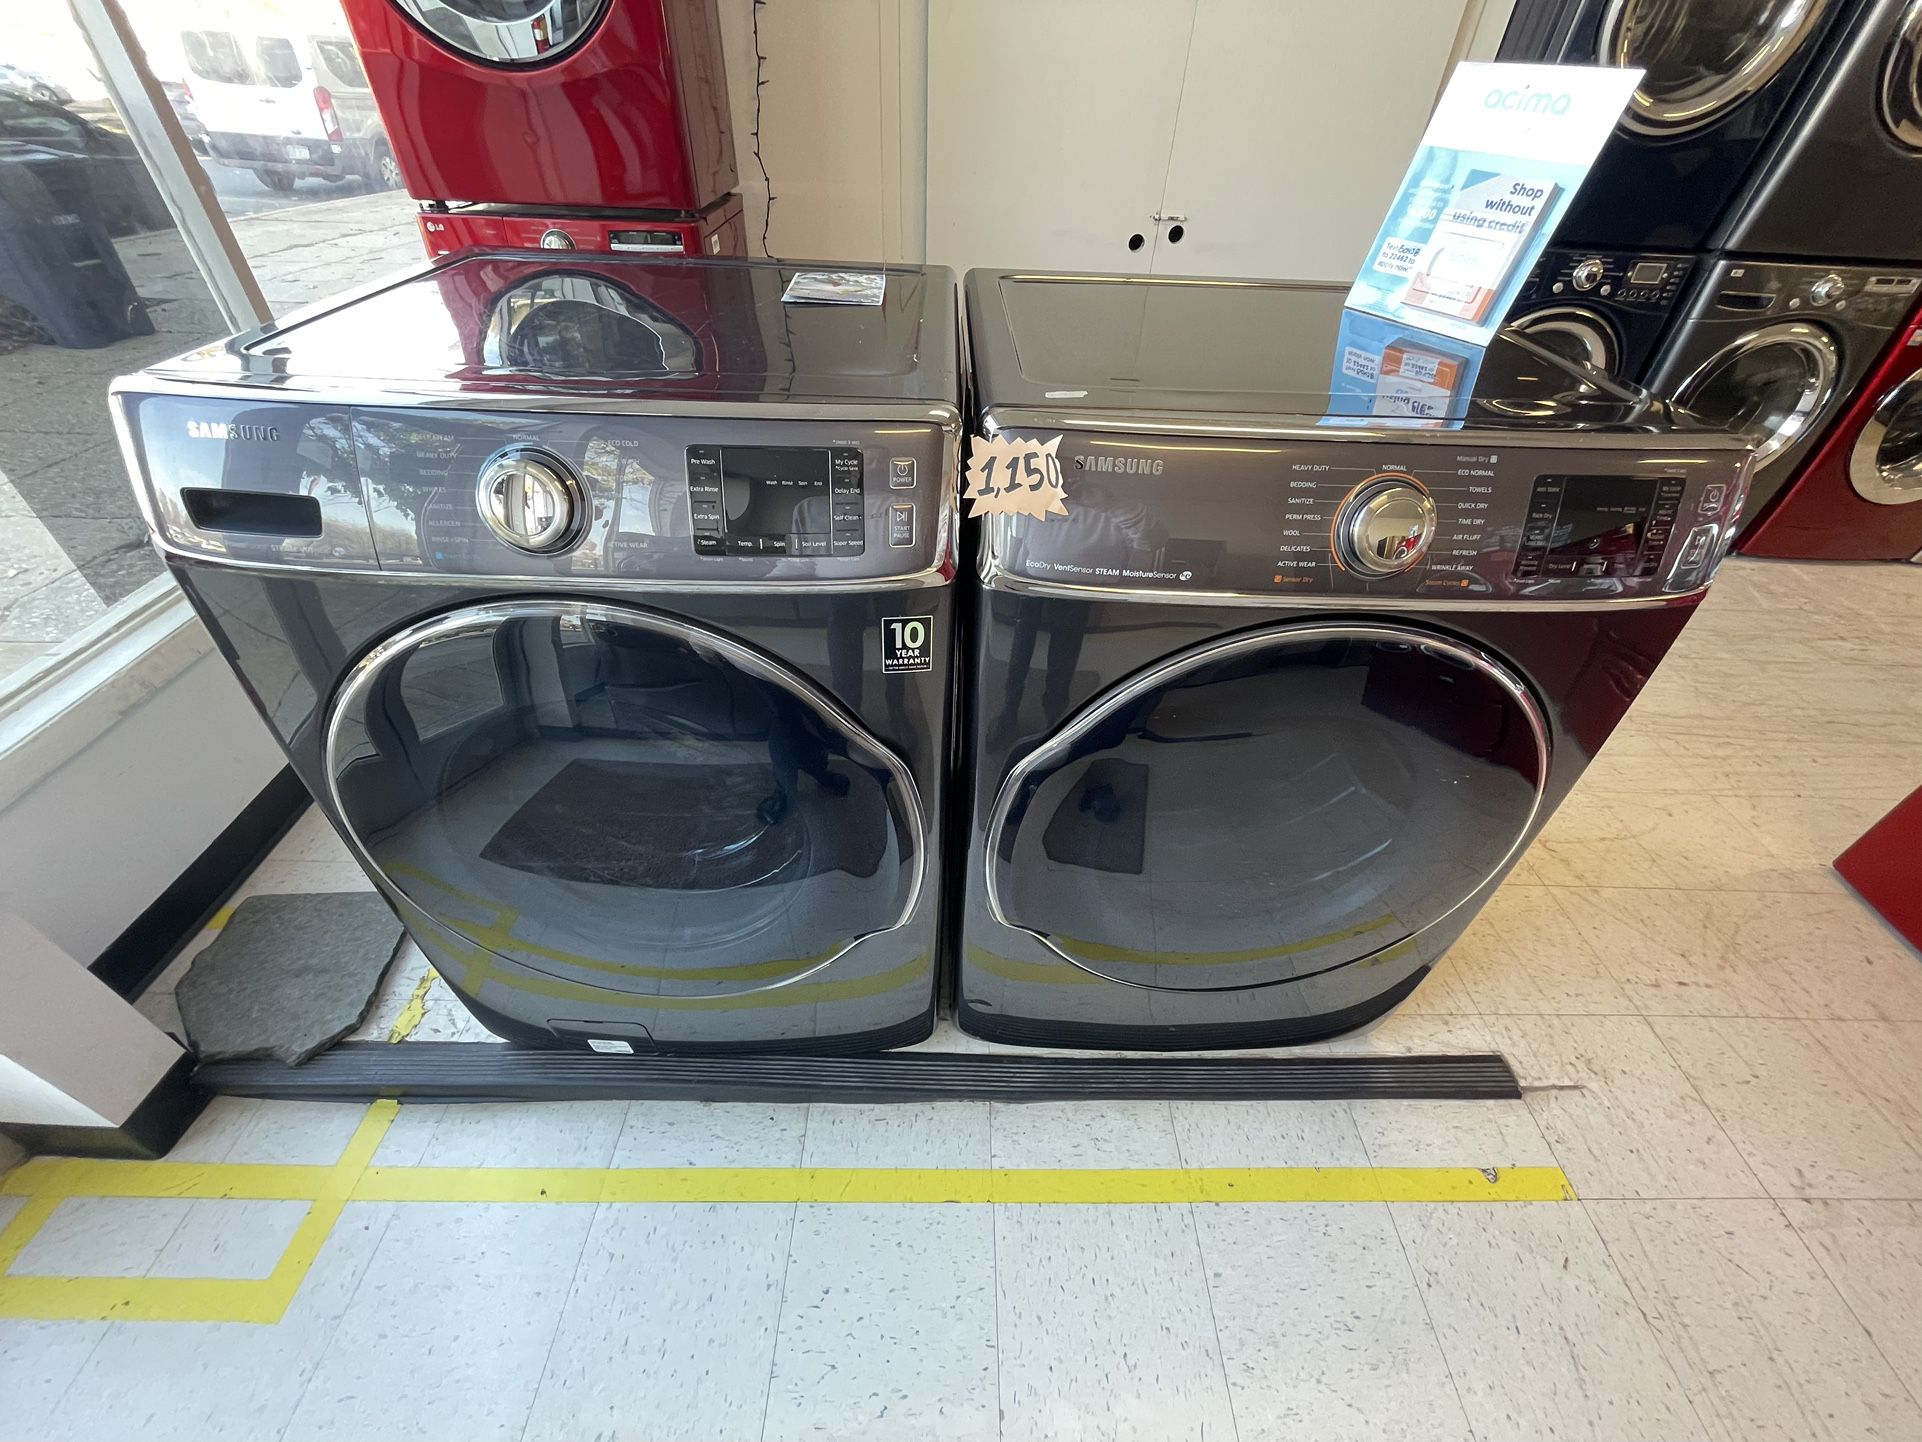 Samsung 30in Front Load Washer And Electric Dryer Set Used Good Condition With 90days Warranty 